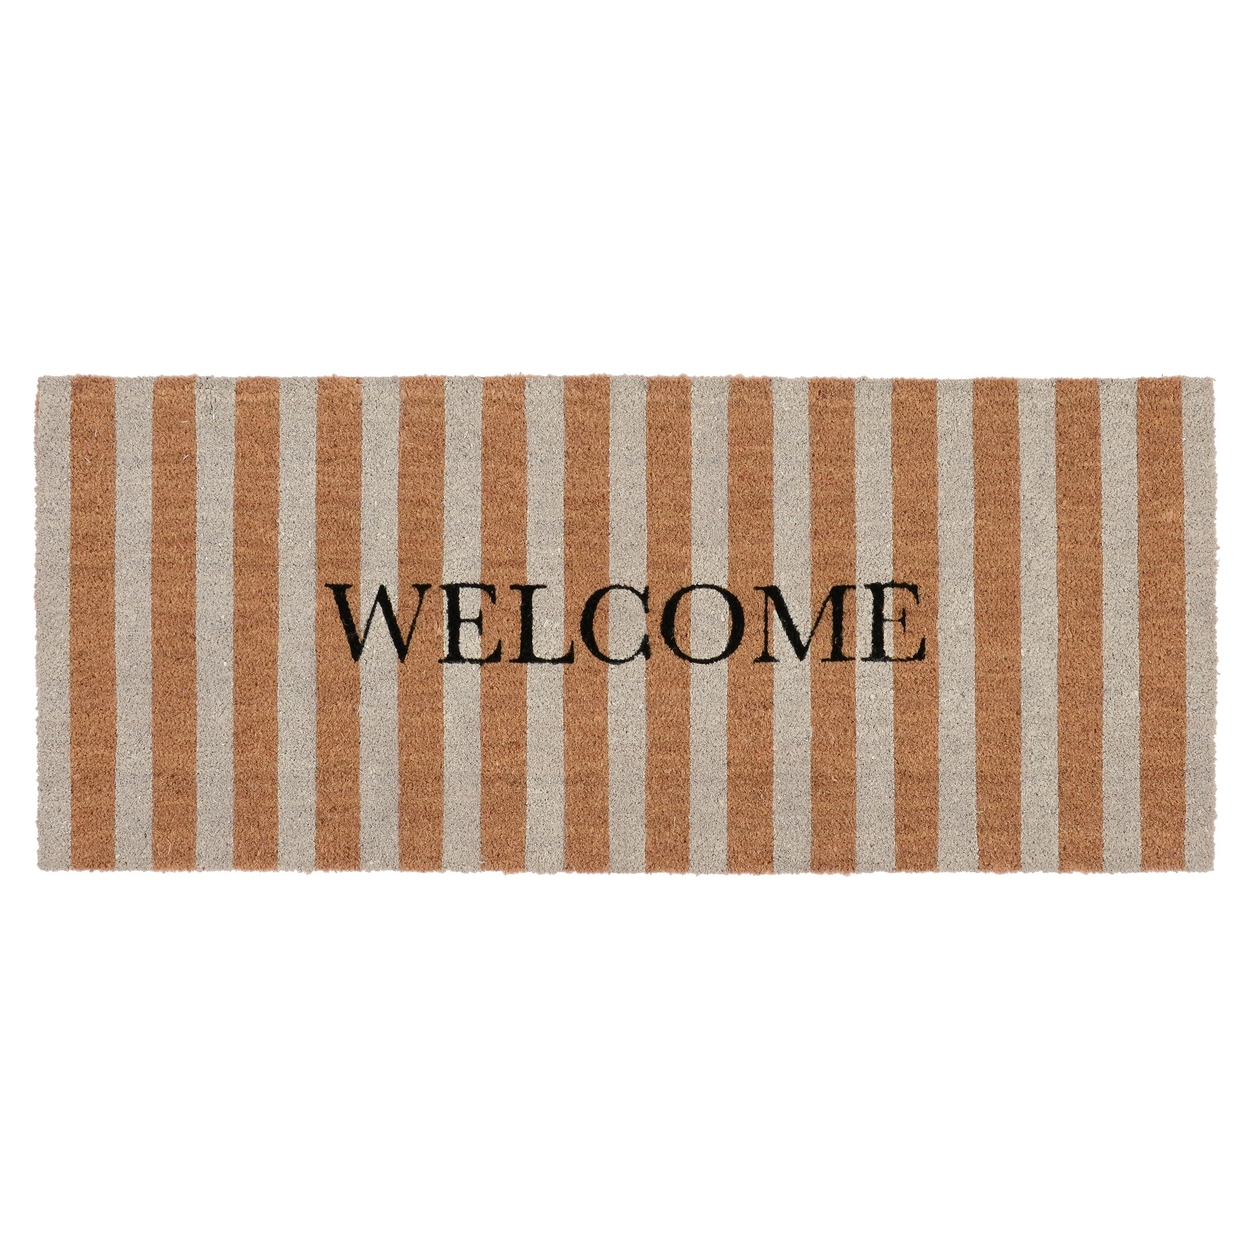 Oy 24 X 57 Coir Welcome Doormat, Hand Screen Print, Brown And Ivory Stripes- Saltoro Sherpi